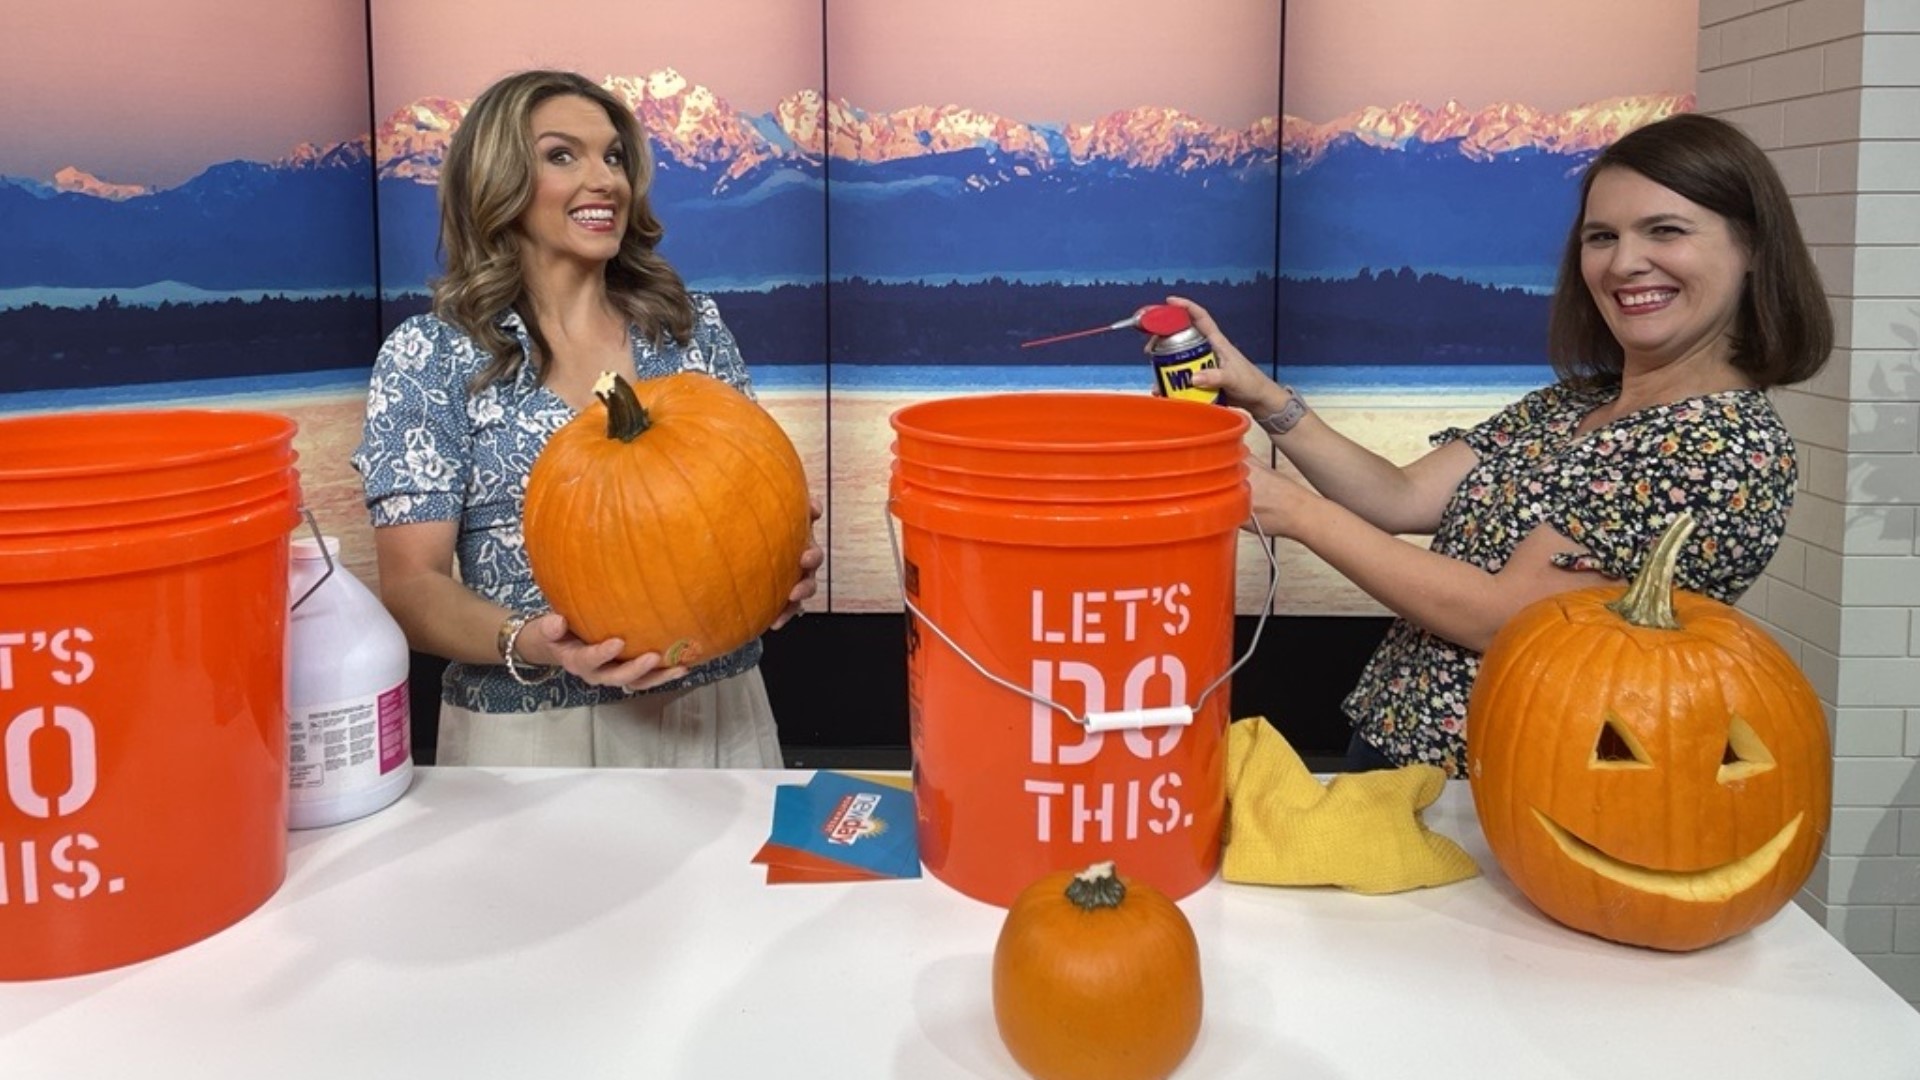 It's about that time to head to the pumpkin patch and pick up a magnificent jack-o'-lantern. We have tips for how to prolong the life of your pumpkin. #newdaynw